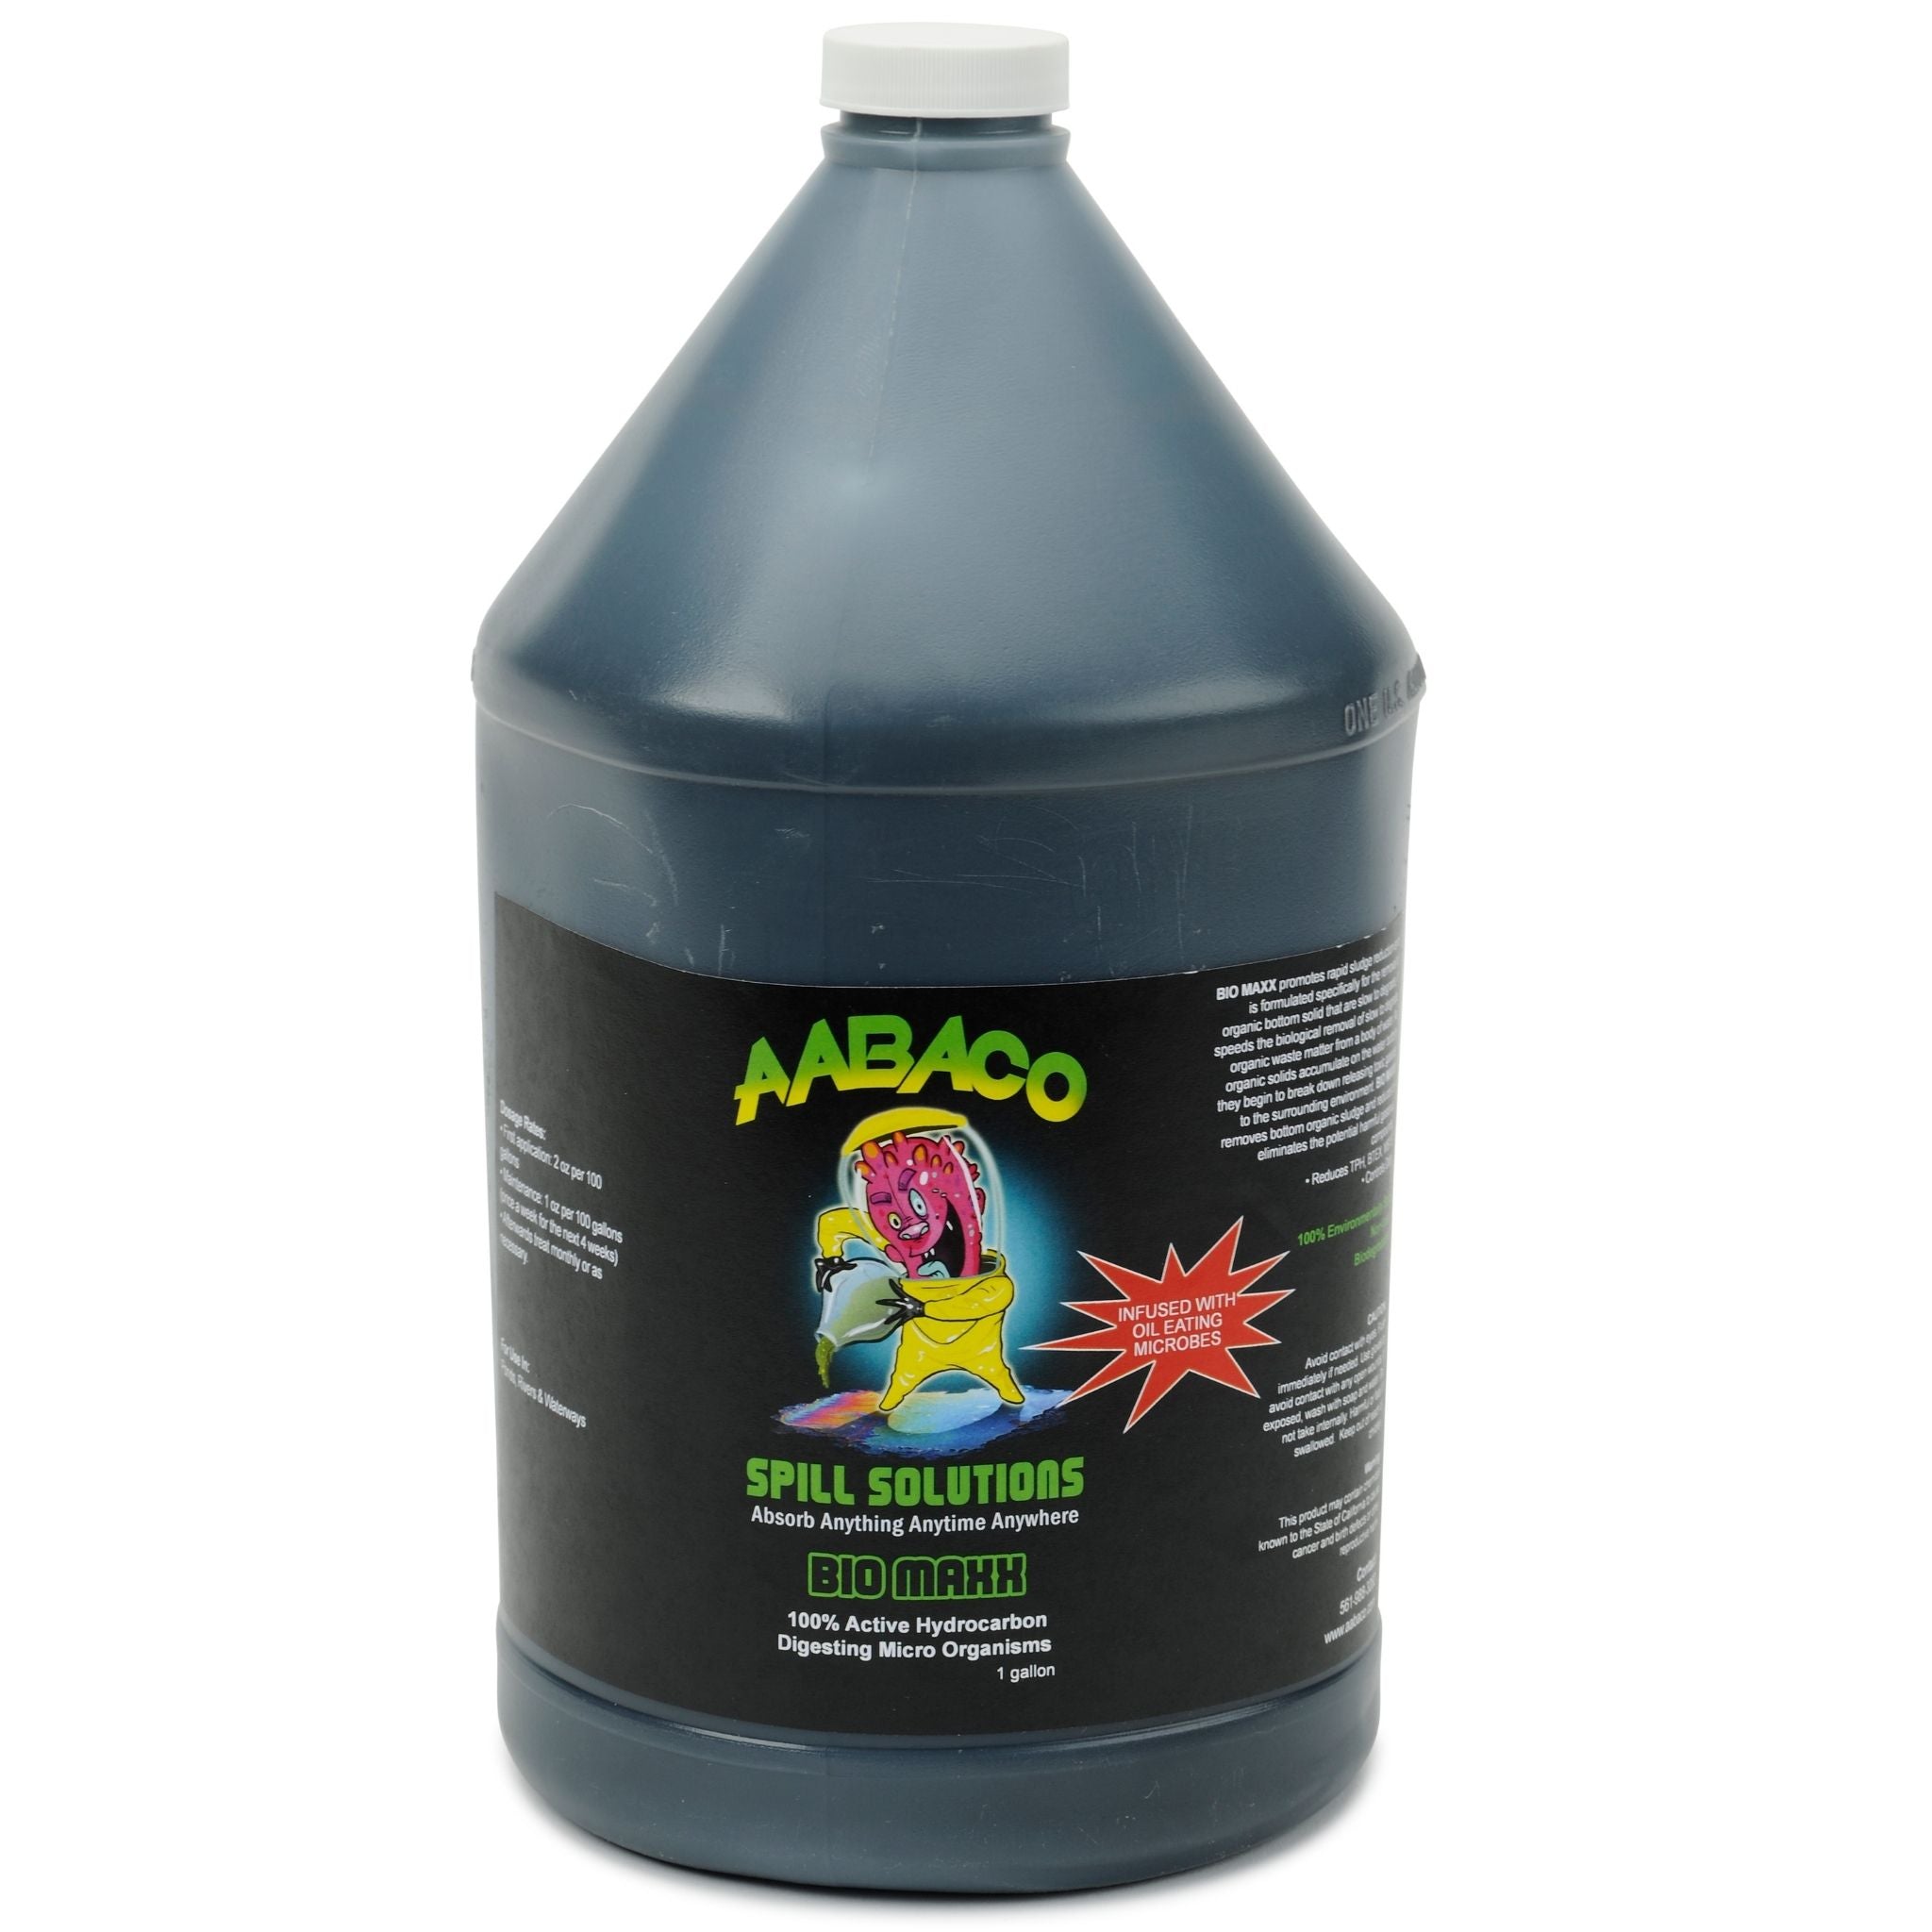 AABACO Bio MAXX - Biodegradable Oil Eating Microbes for Sludge